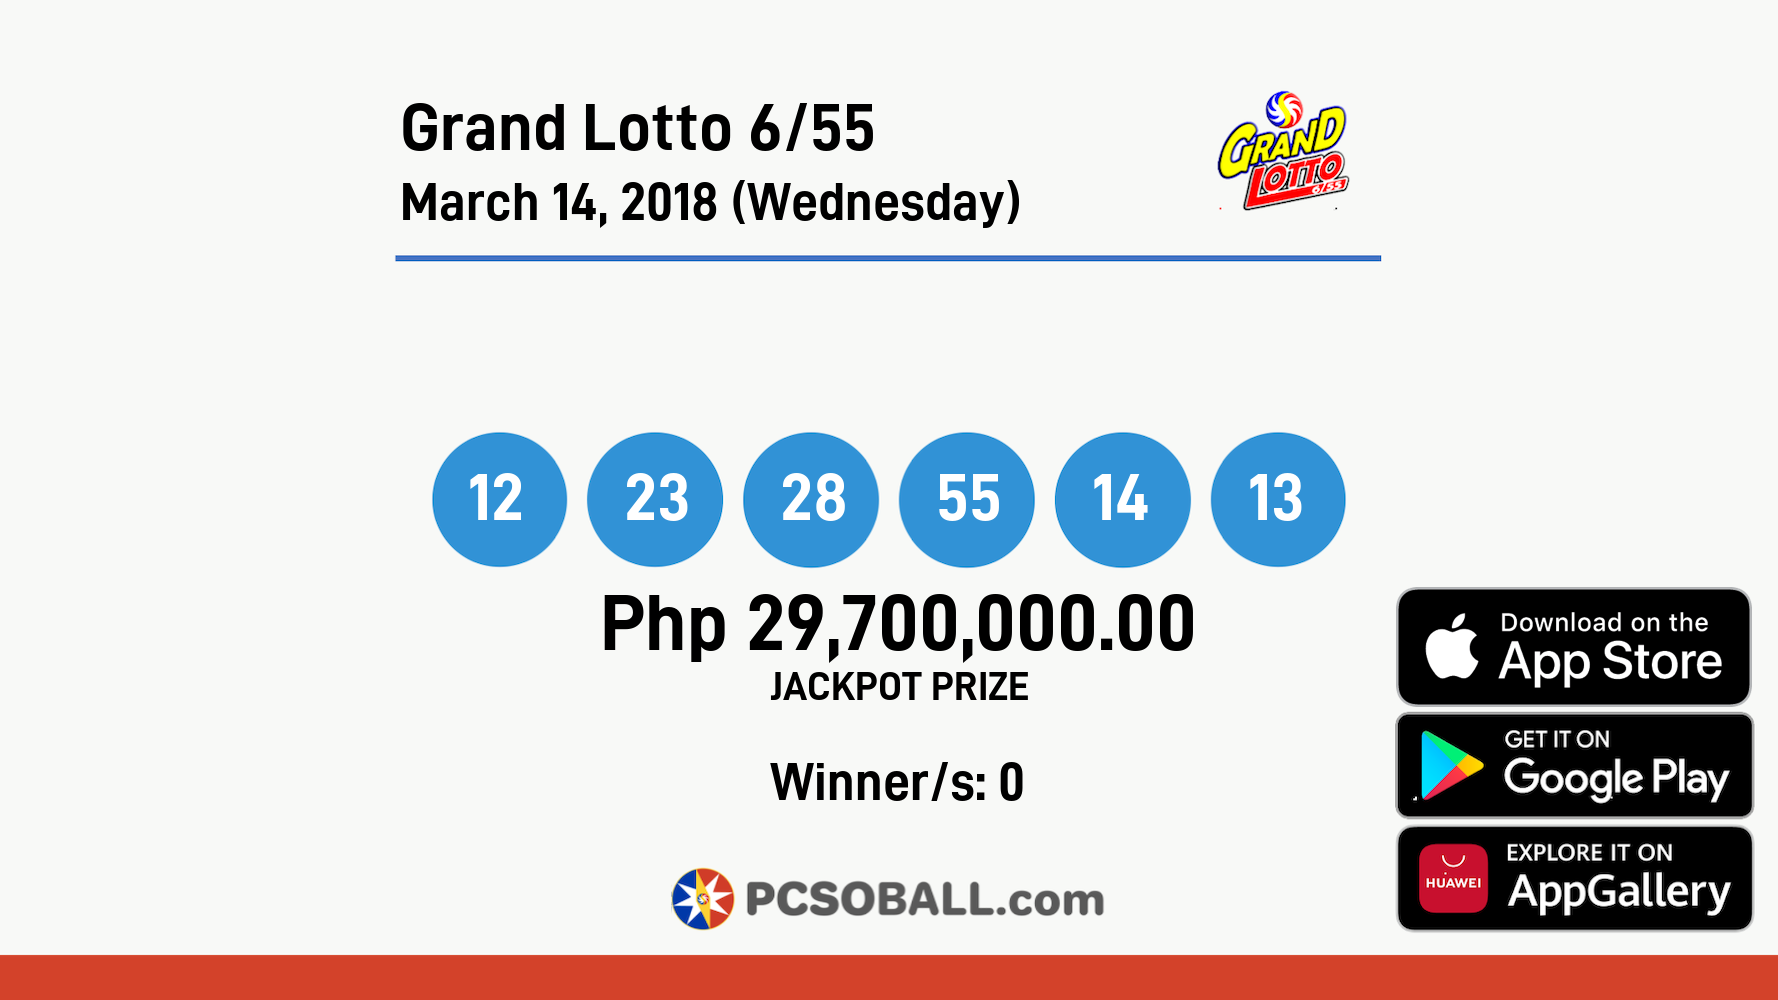 Grand Lotto 6/55 March 14, 2018 (Wednesday) Result